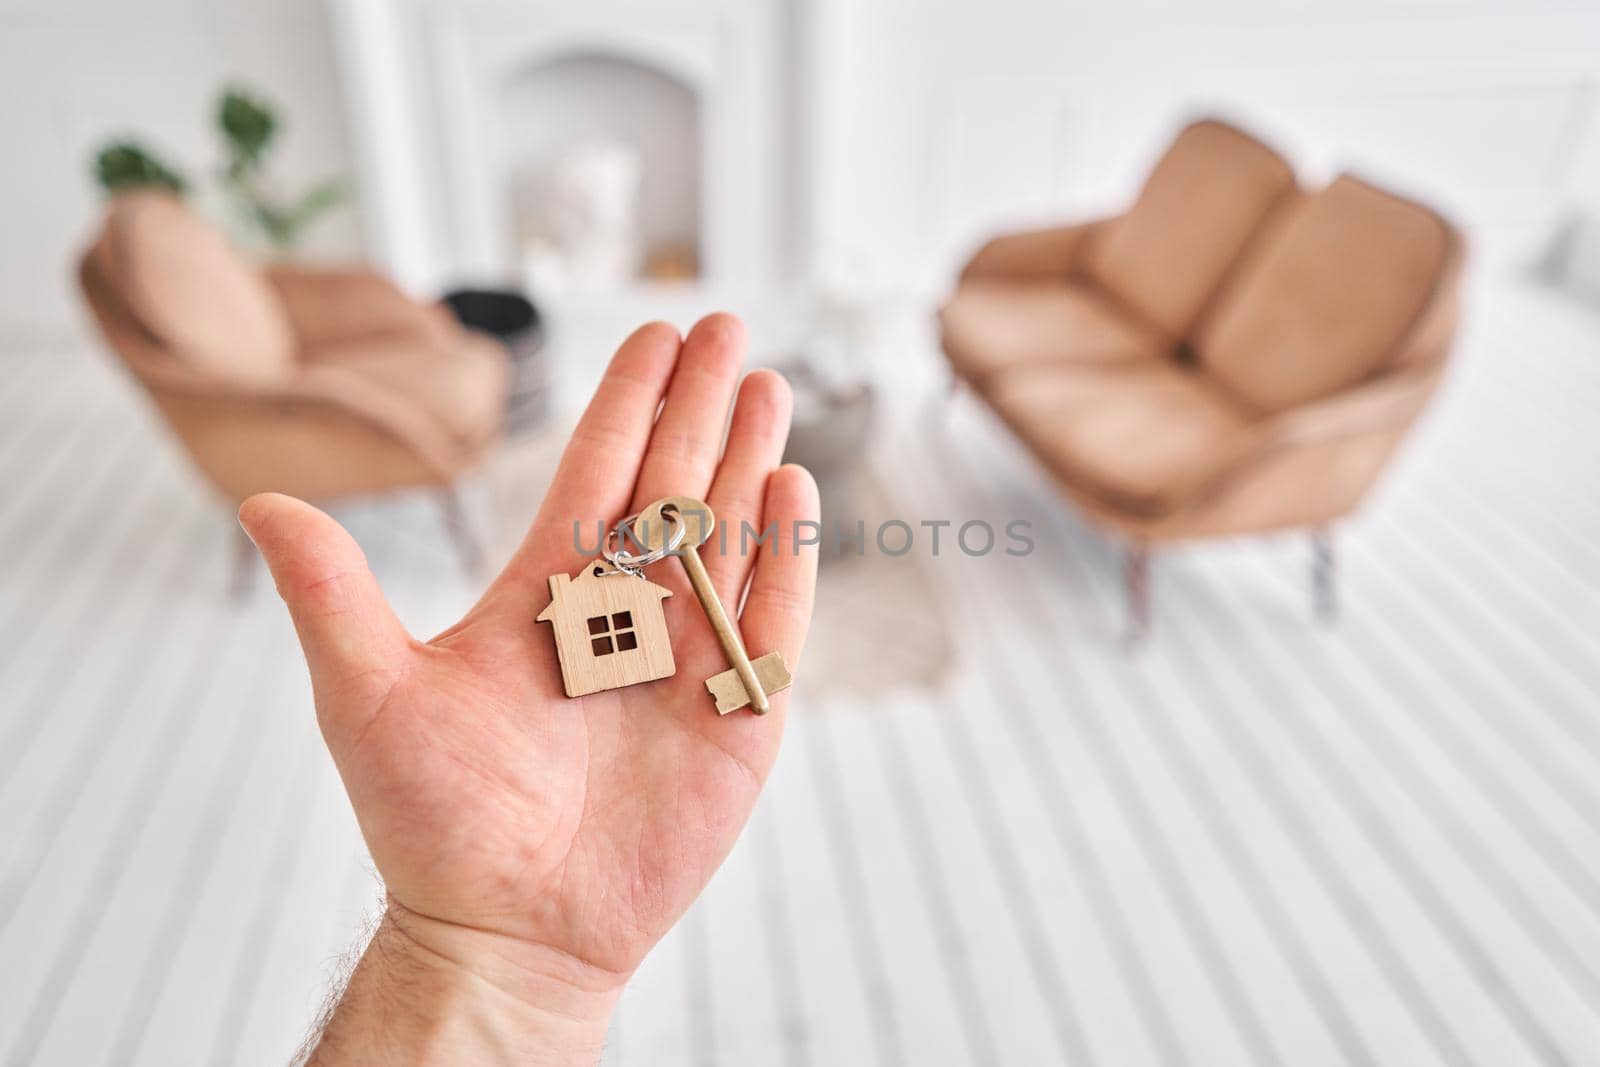 Men hand holding key with house shaped keychain. Modern light lobby interior. Mortgage concept. Real estate, moving home or renting property. by Malkovkosta